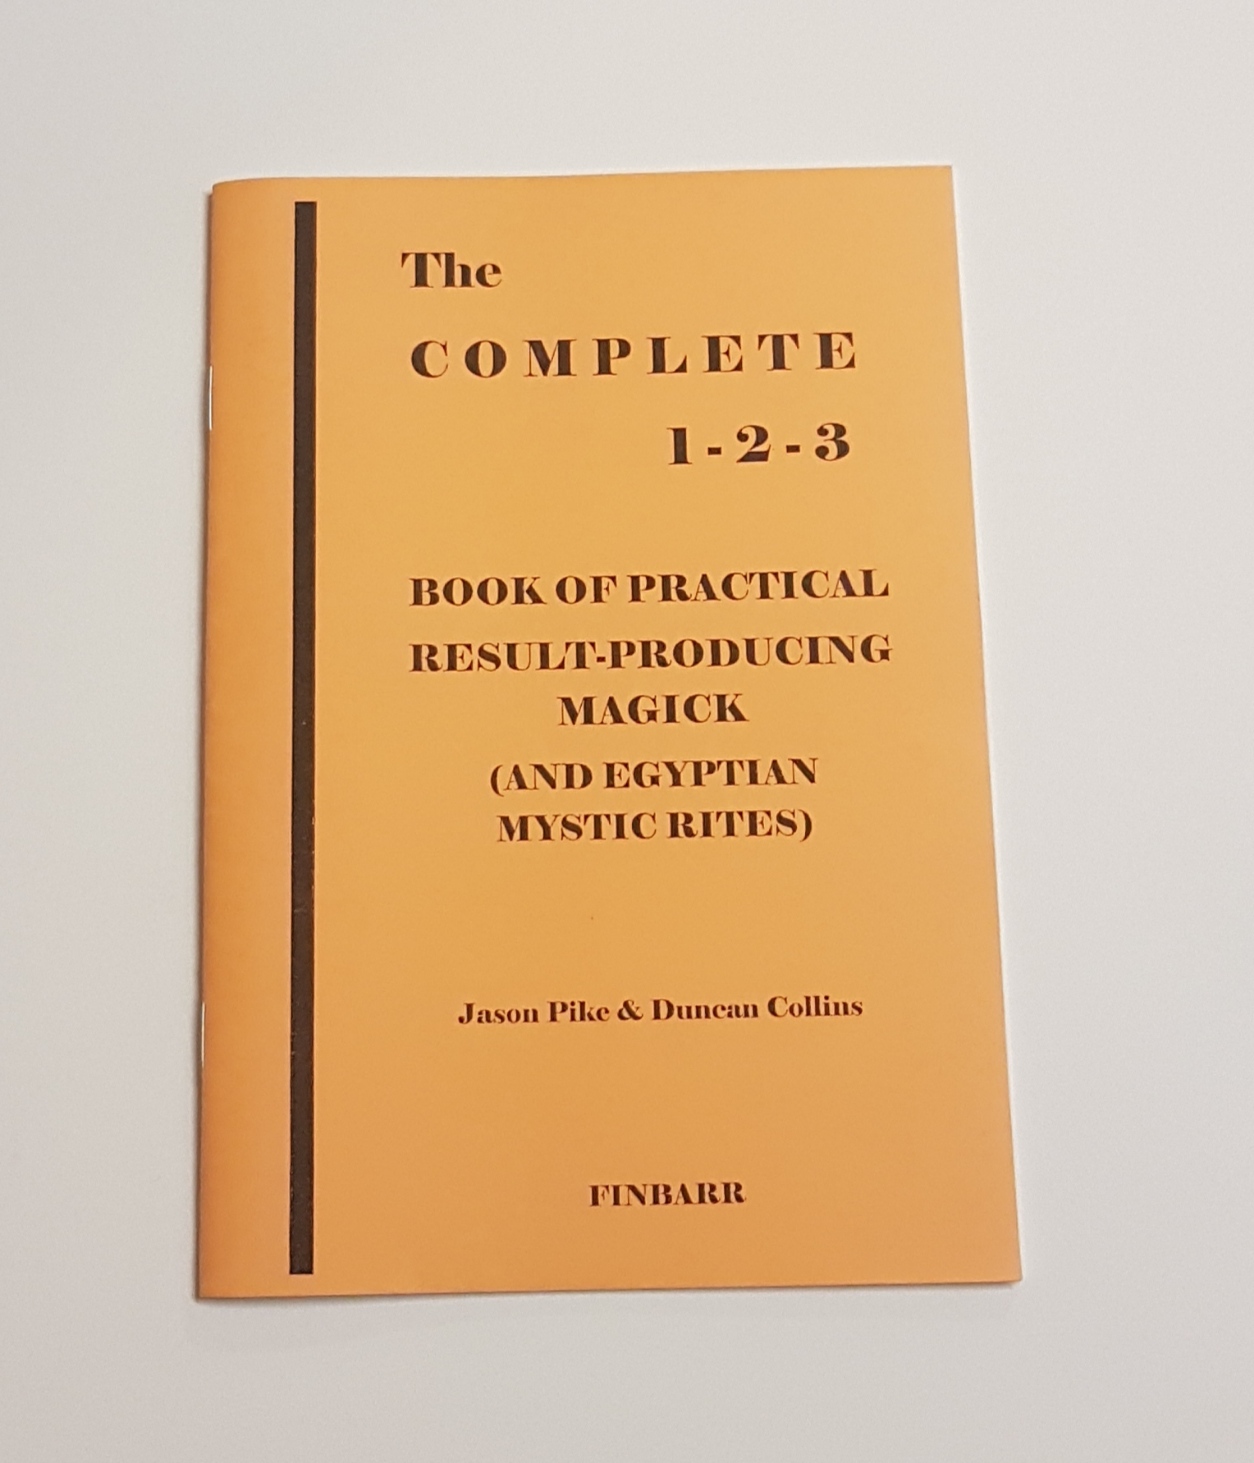 THE COMPLETE 1-2-3 BOOK OF PRACTICAL RESULT PRODUCING MAGICK 